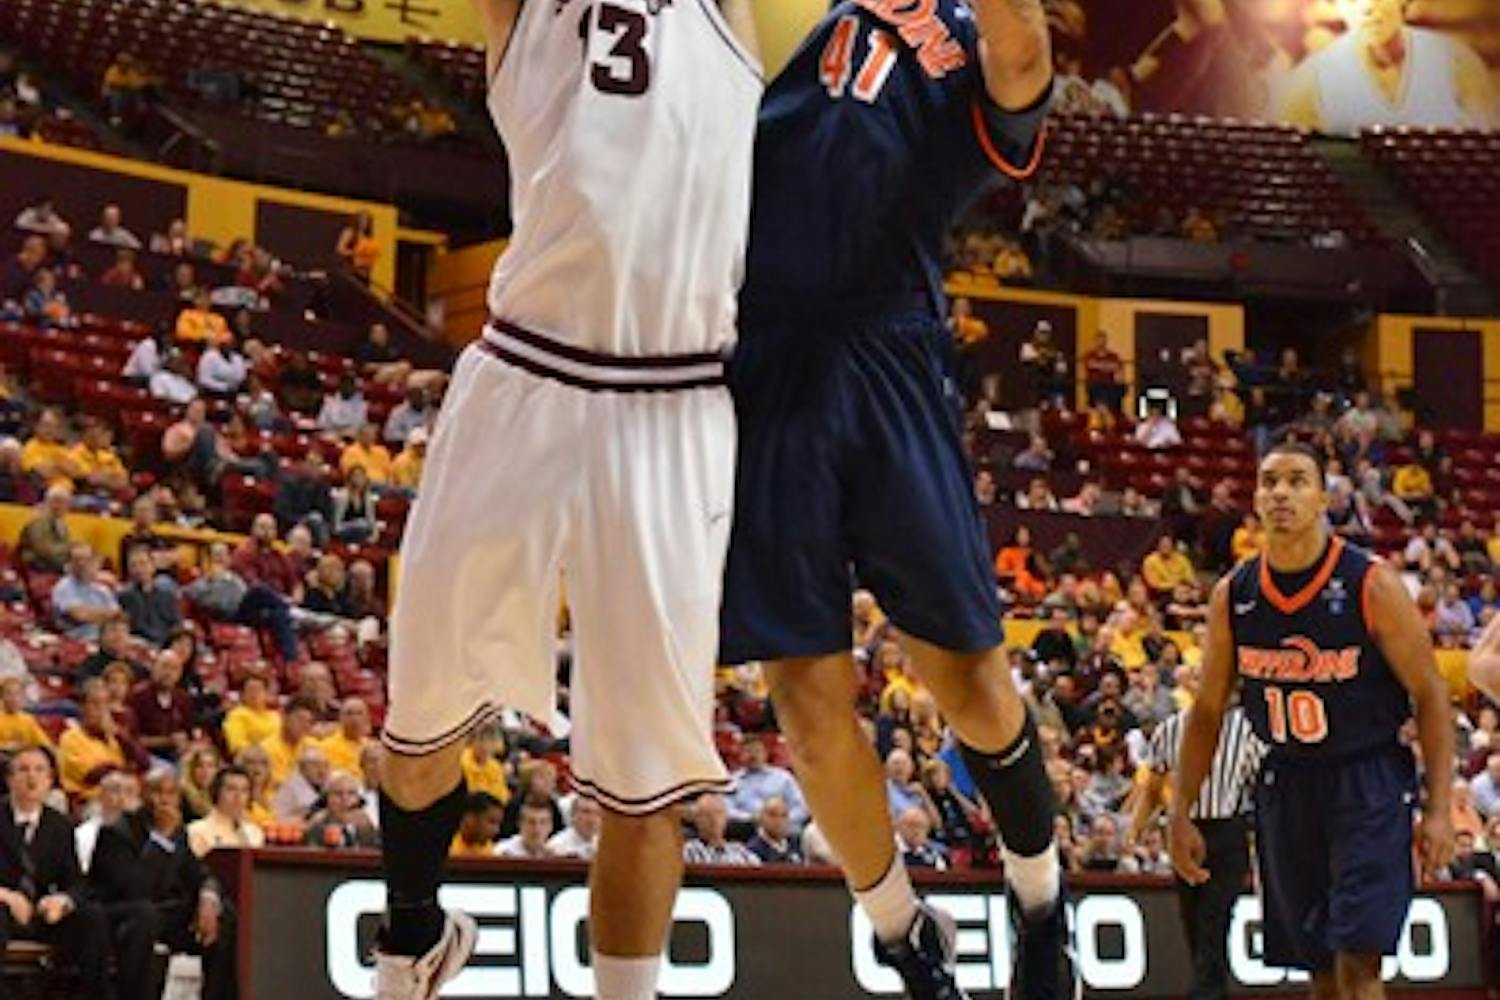 FIRED UP: Senior guard Ty Abbott puts up a shot over an Oregon defender last season. After earning First Team All-Pac-10 honors last year, Abbott returns as the Sun Devils' primary leader. ASU men's basketball opens the season Tuesday night in Albuquerque, N.M., against UNM. (Photo by Scott Stuk)